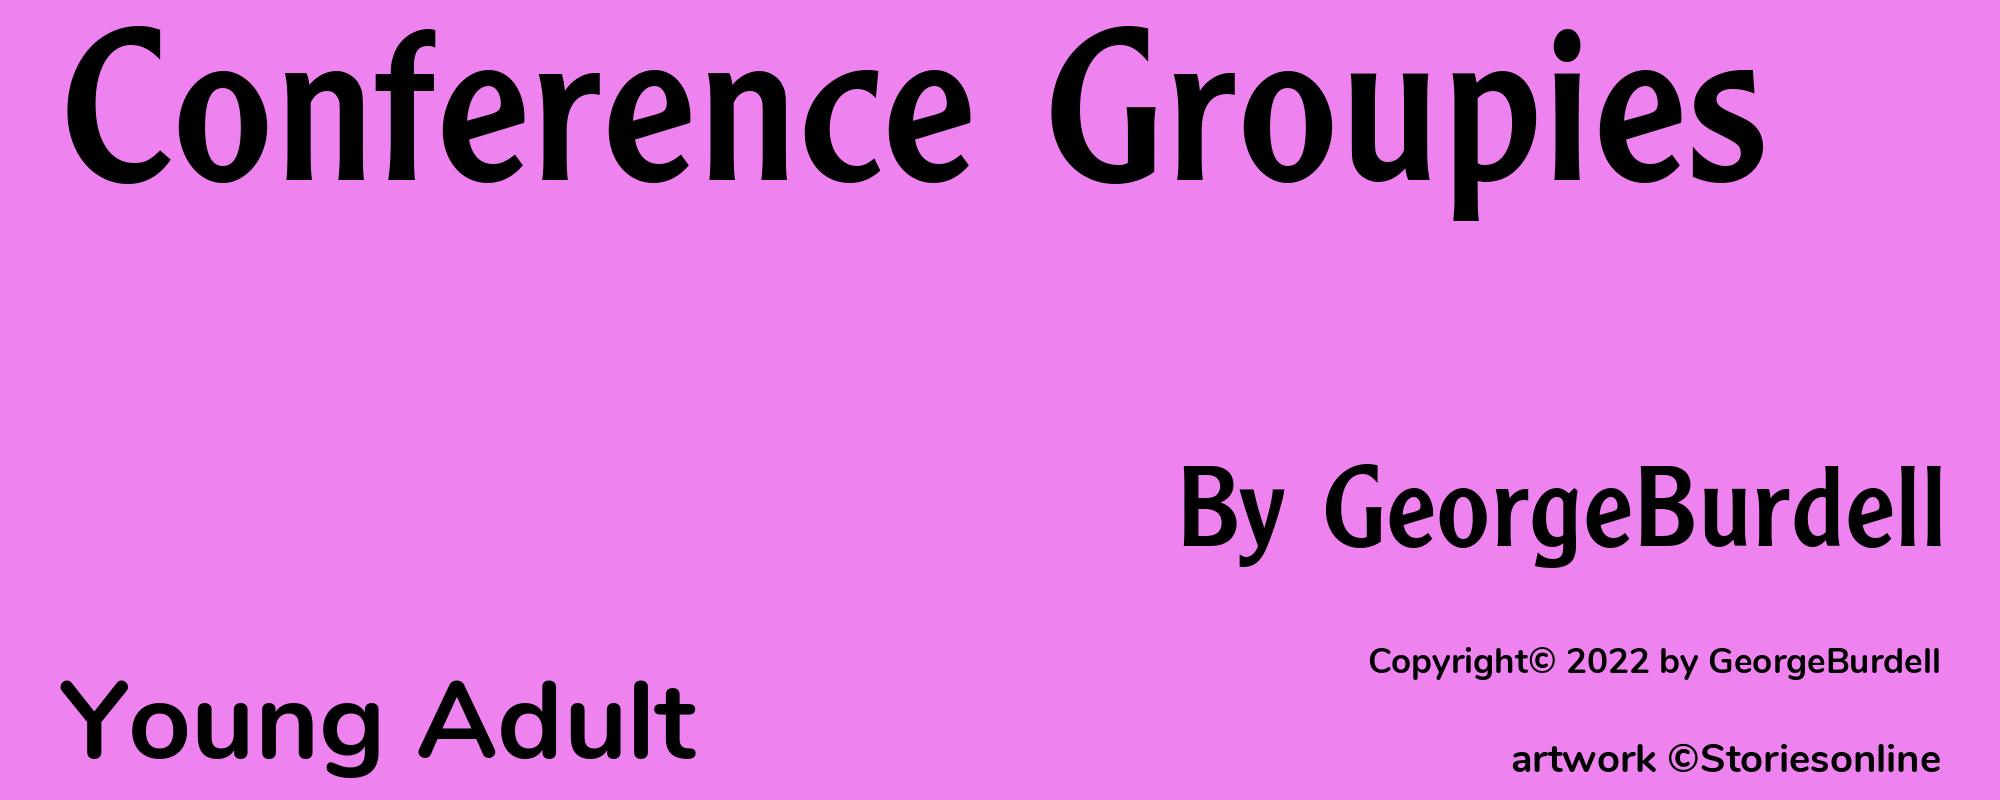 Conference Groupies - Cover